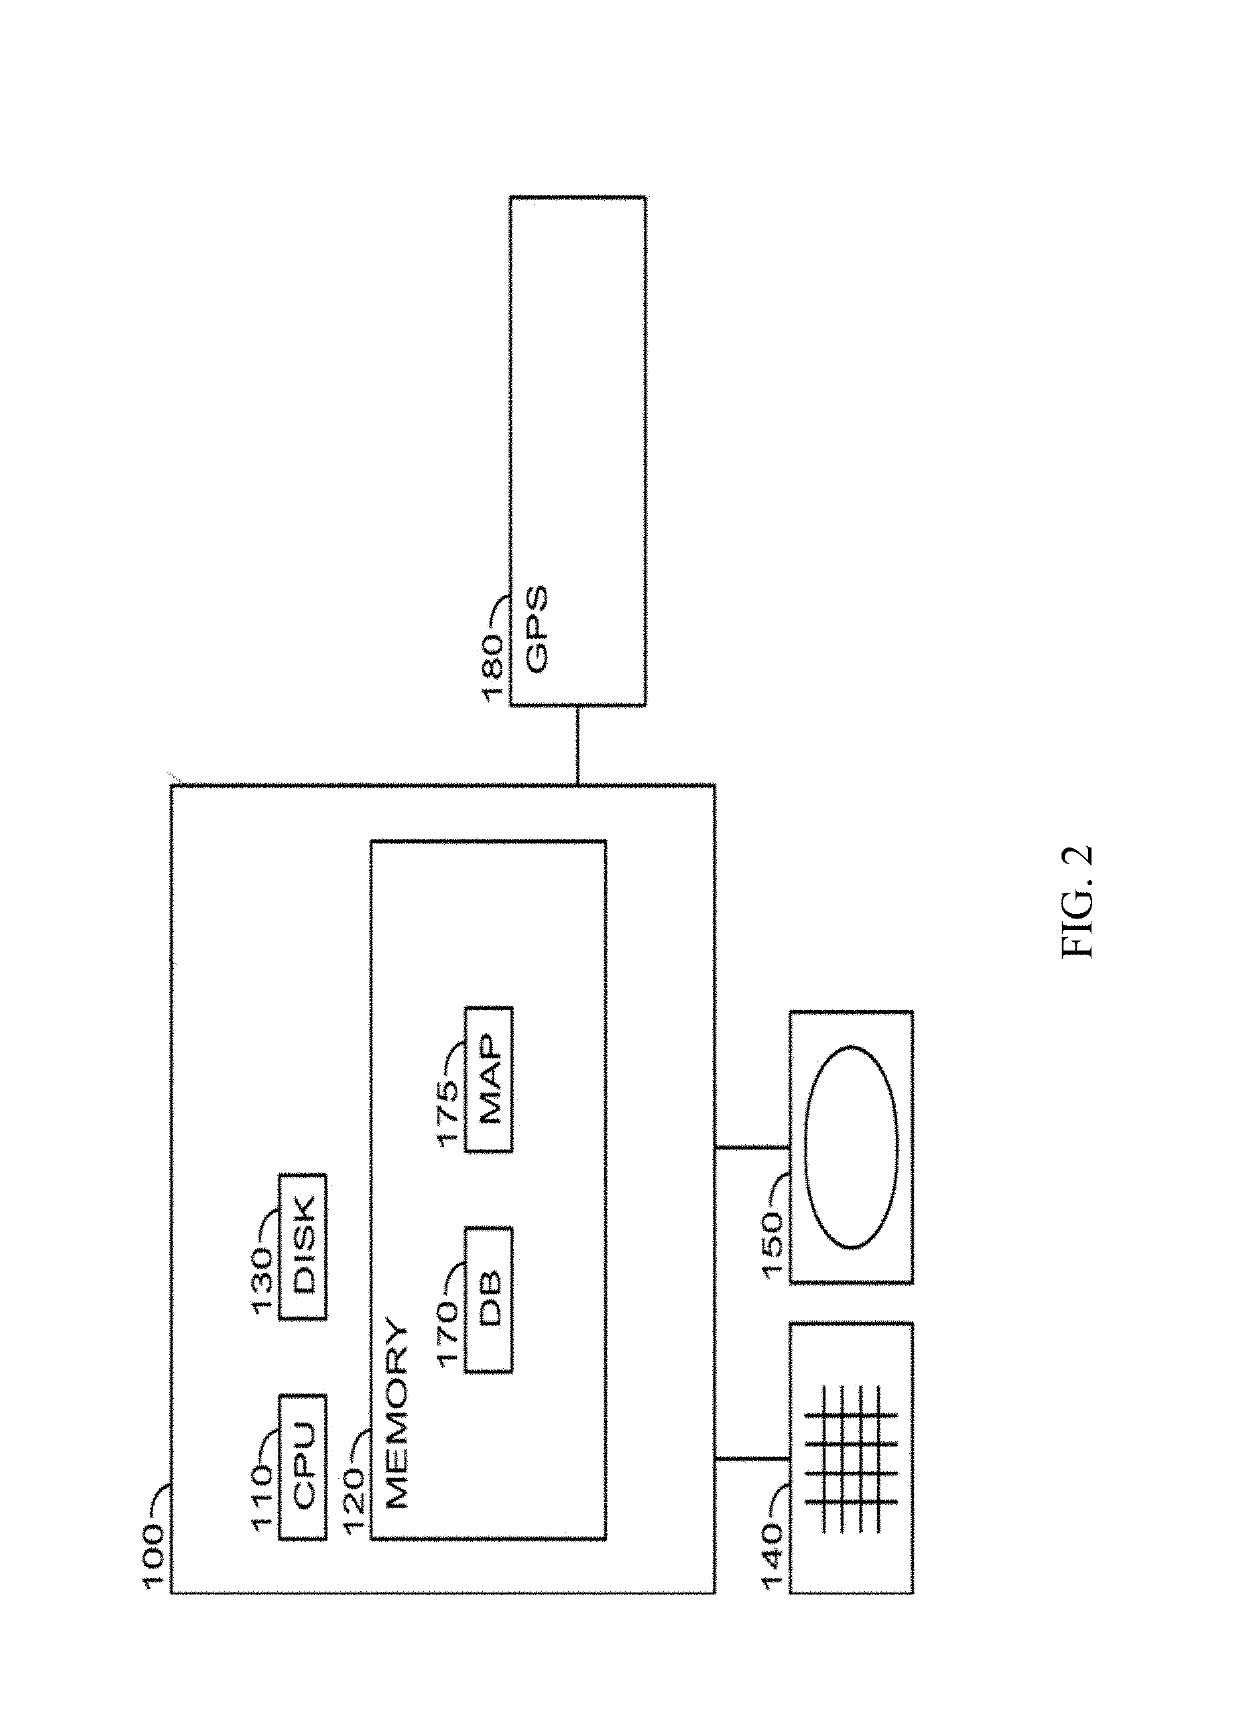 System and method for low speed lateral control of a vehicle